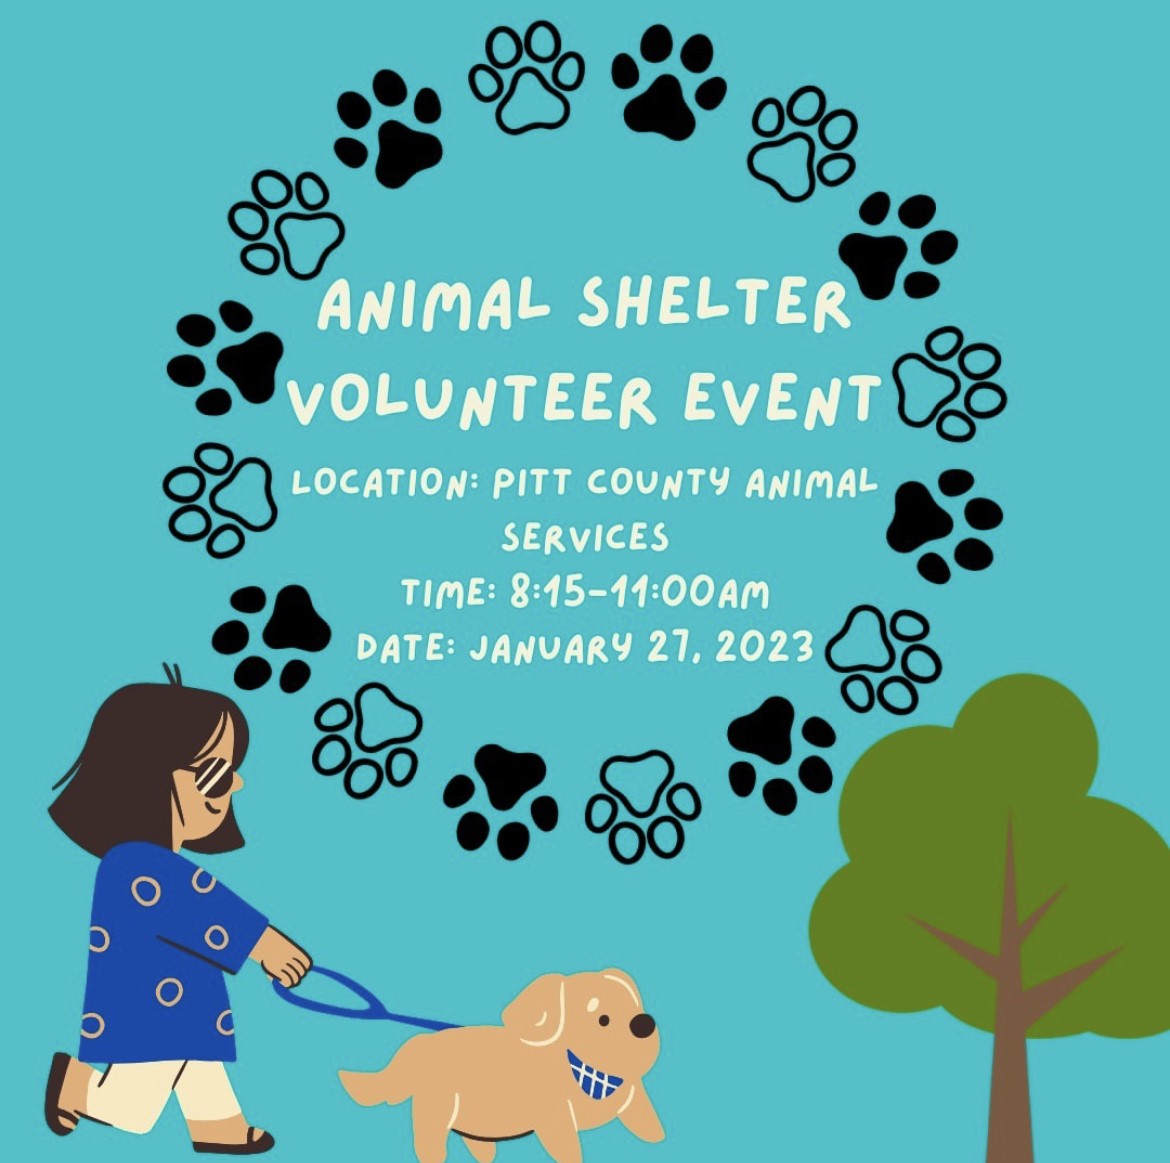 ECU USNDA will be having a group volunteering event at the Pitt County Animal Services and help walk dogs on January 27th. If interested, please sign up on the google form. docs.google.com/forms/d/e/1FAI…